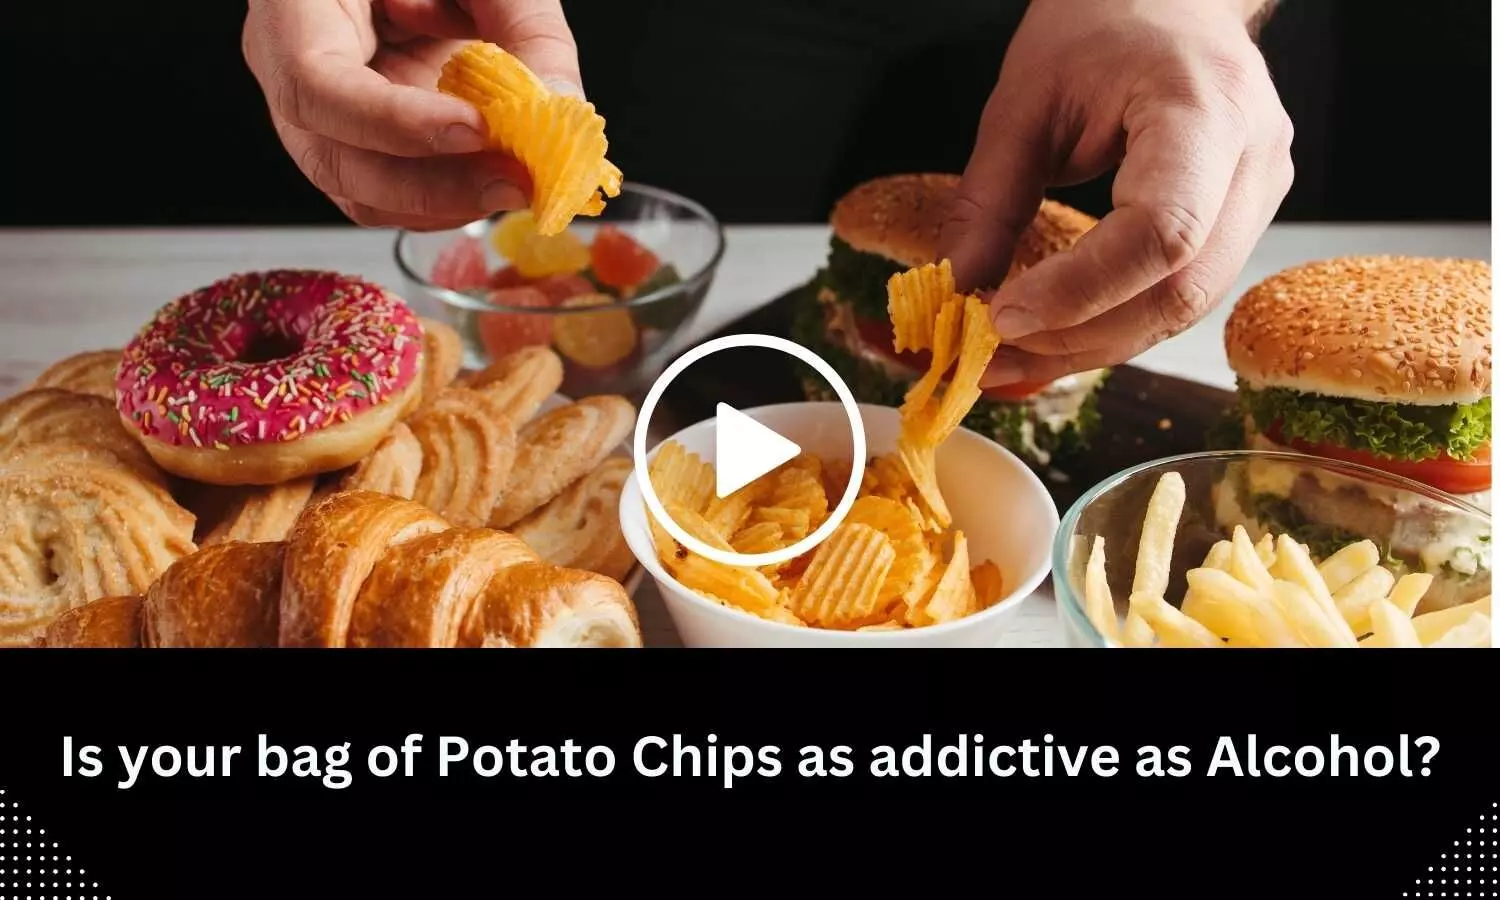 Is your bag of Potato Chips as addictive as Alcohol?